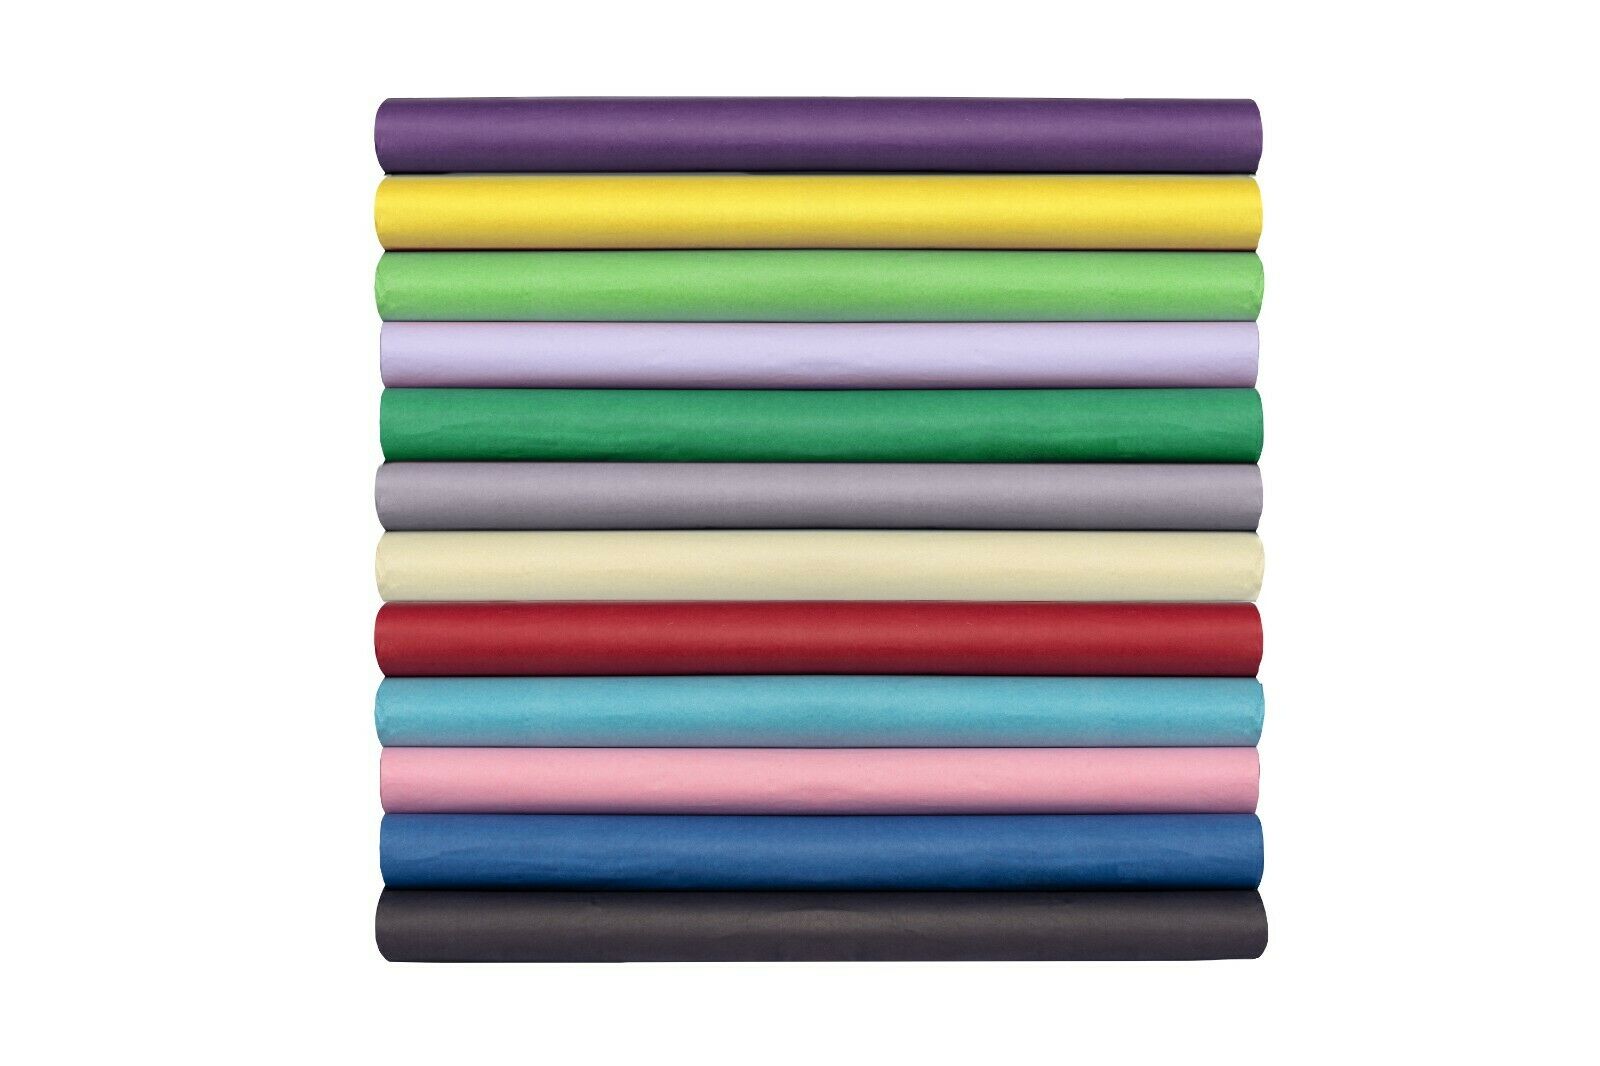 480 Sheets Solid Colored Tissue Paper Ream 15" X 20" - Gifts, Wrapping Tissue